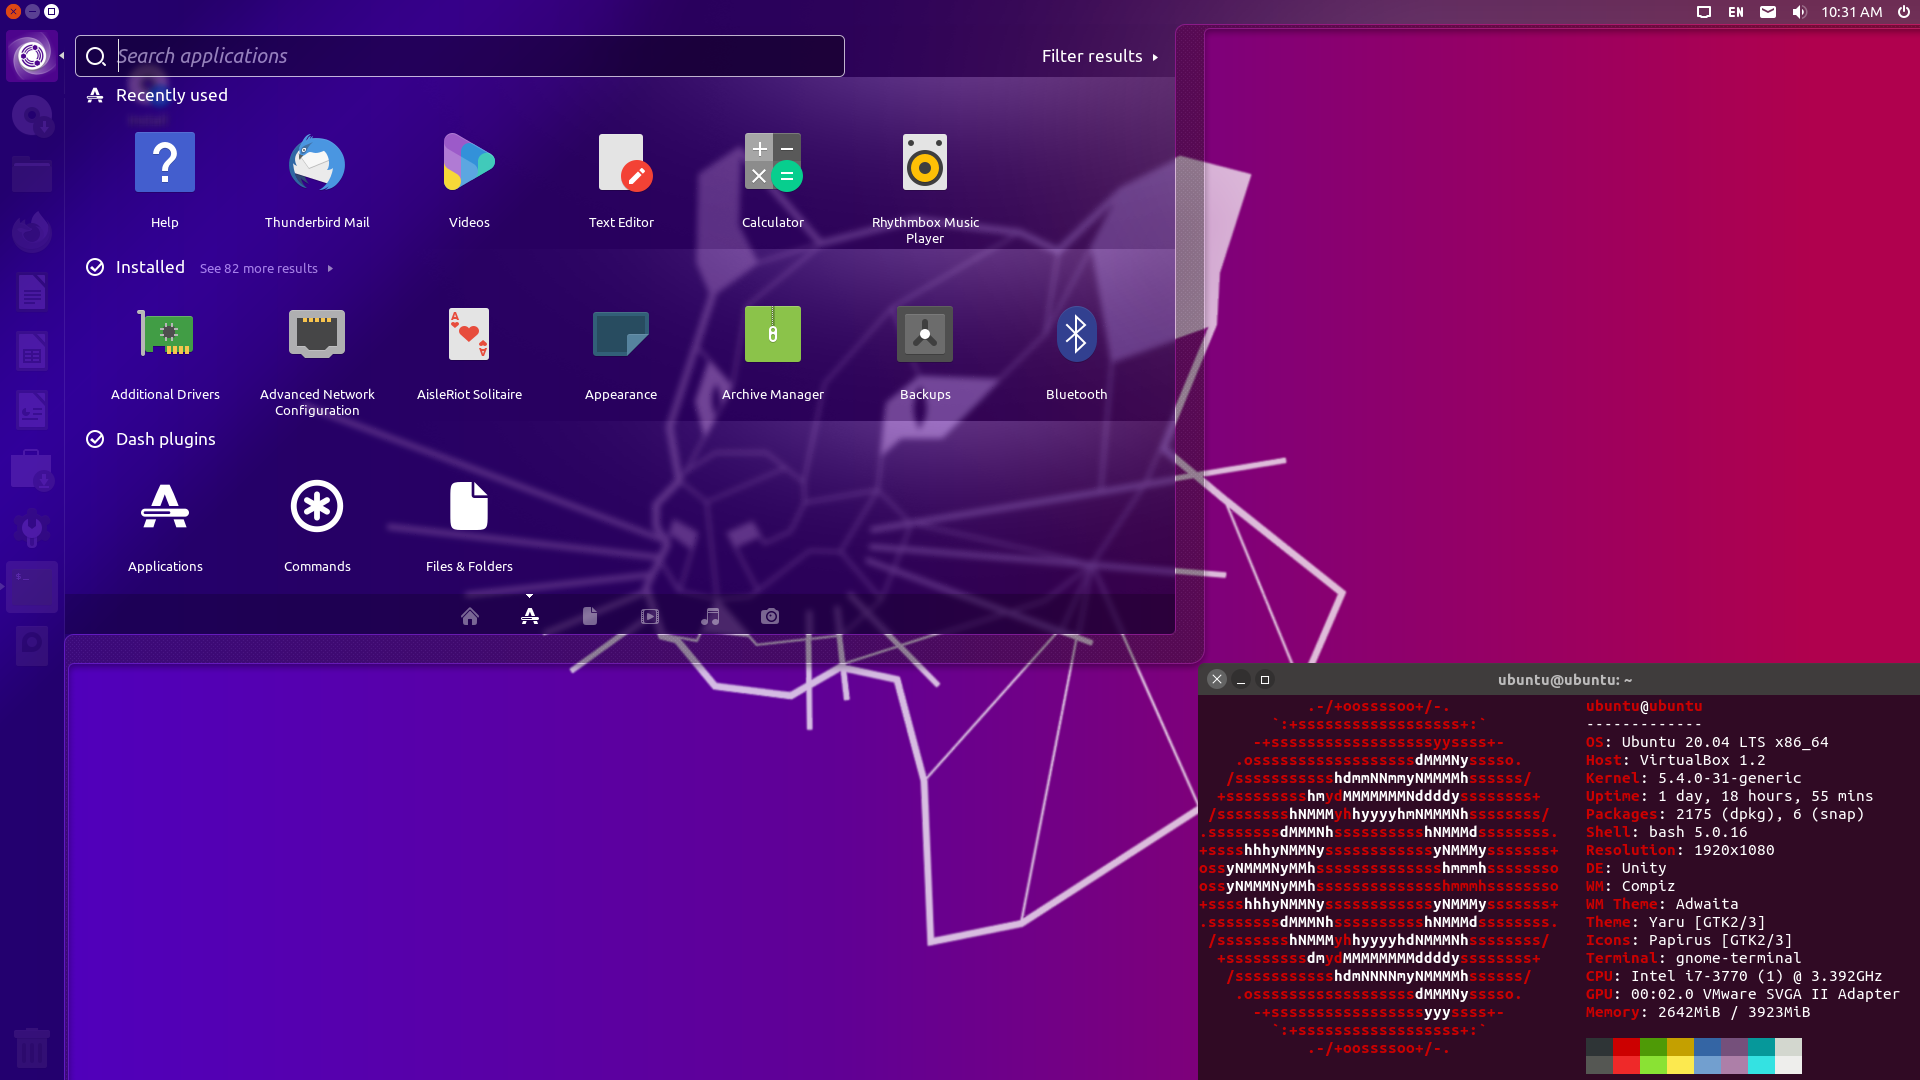 Preview of the Ubuntu Unity 20.04 distribution